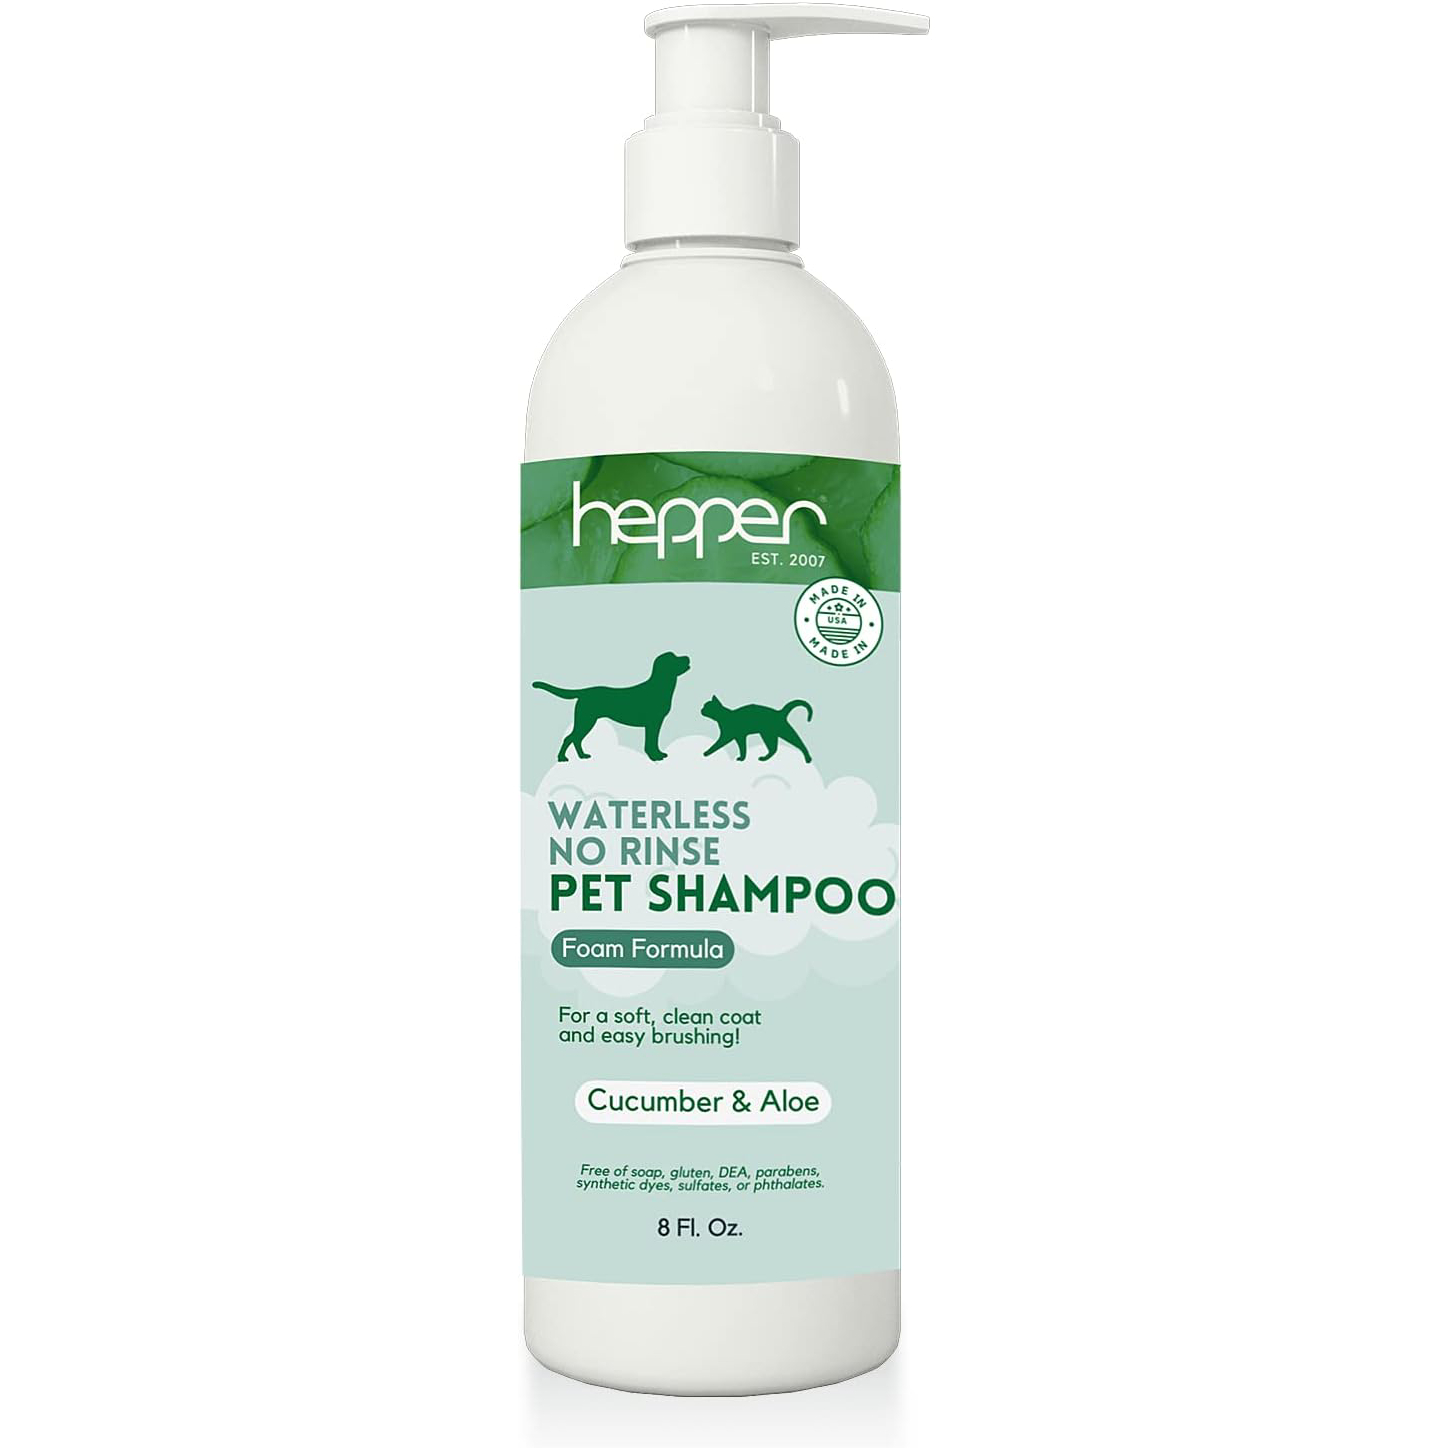 Hepper Waterless No Rinse Dry Shampoo for Dogs, Cats, and Other Pets